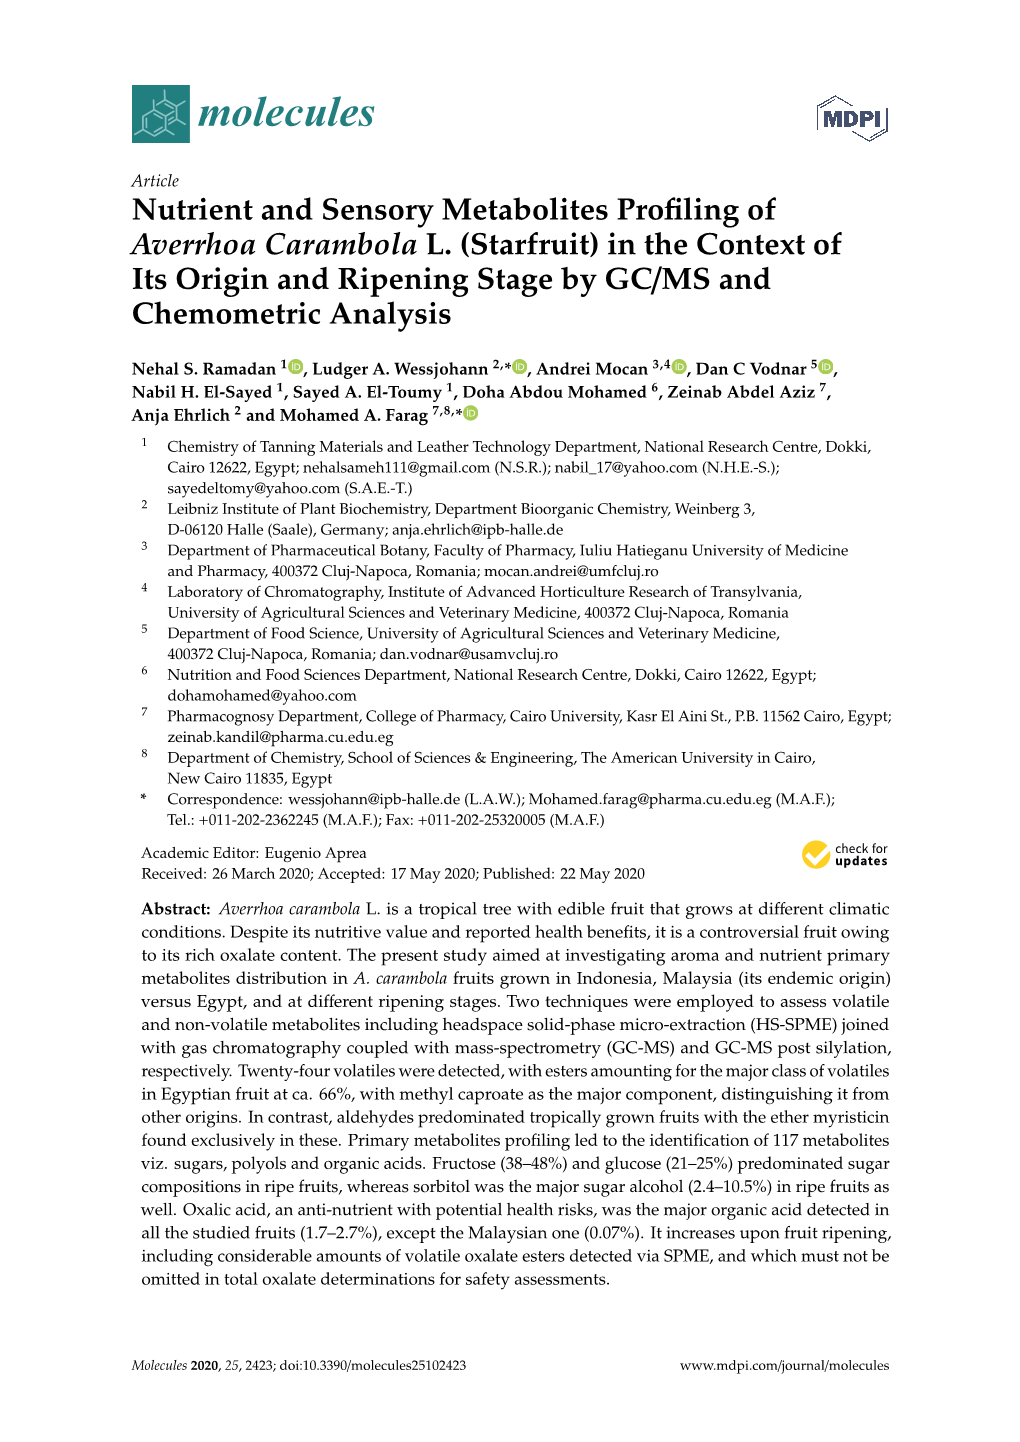 Nutrient and Sensory Metabolites Profiling of Averrhoa Carambola L.(Starfruit) in the Context of Its Origin and Ripening Stage by GC/MS and Chemometric Analysis